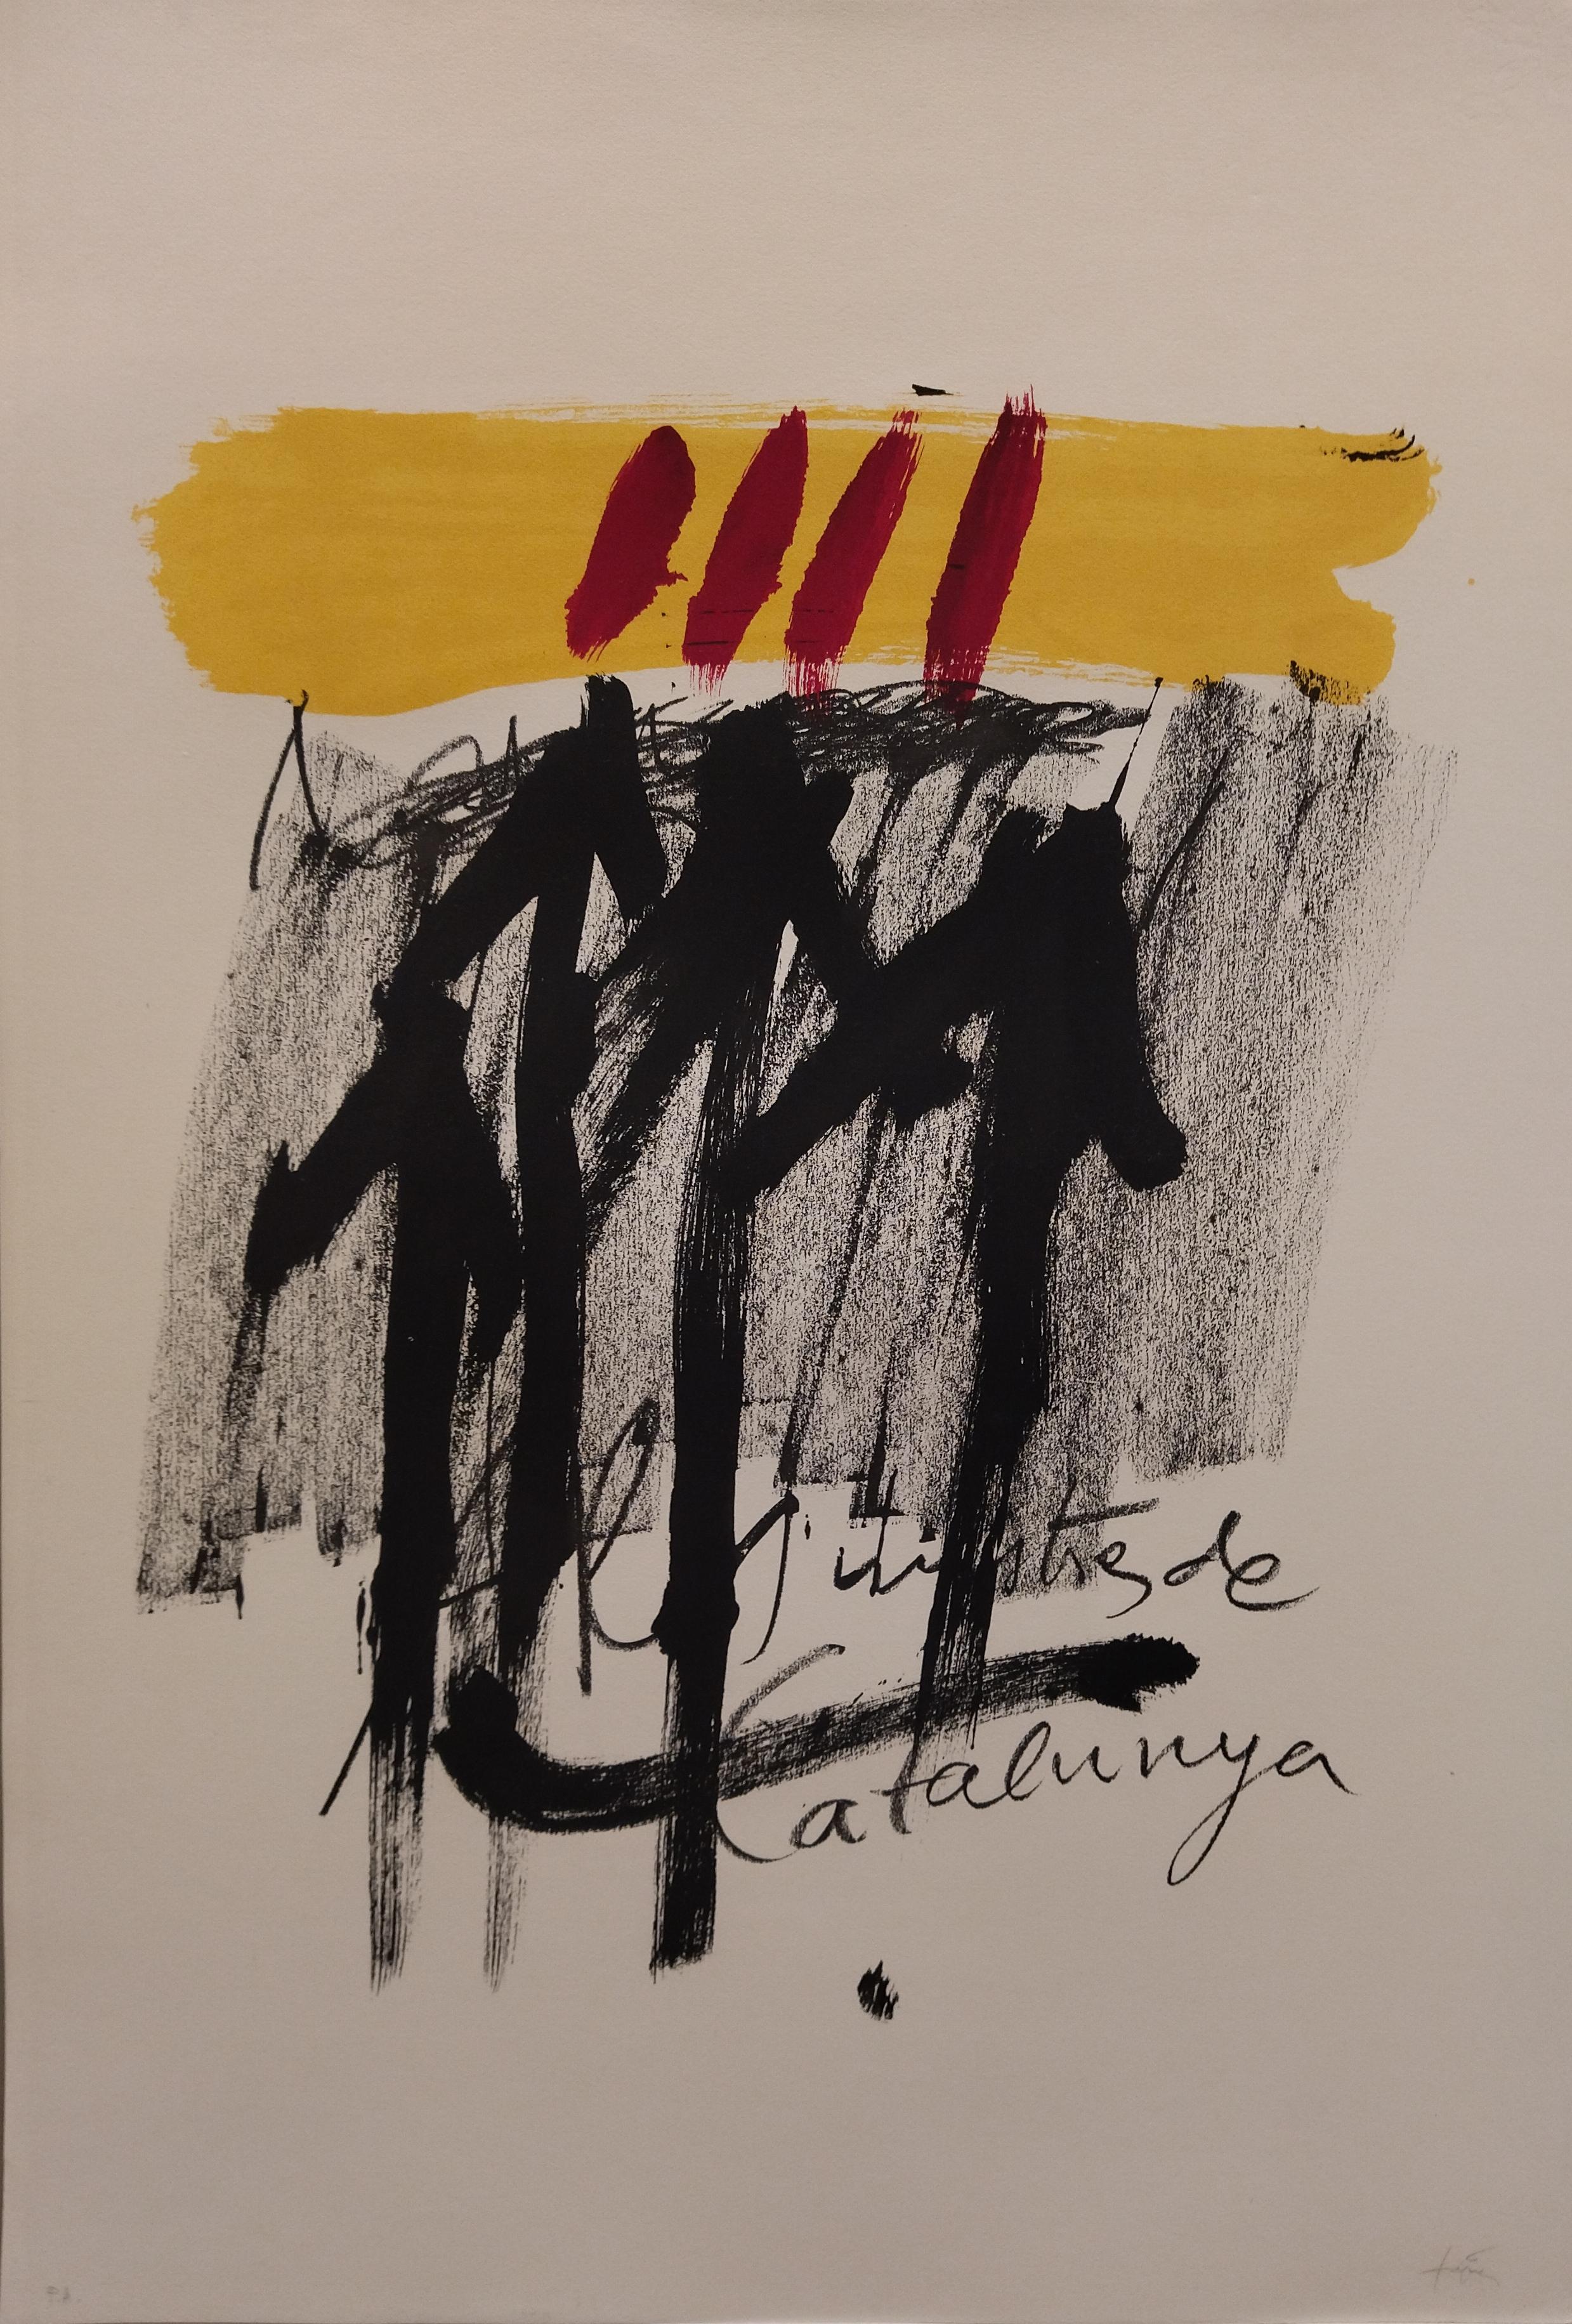  Tapies 114 Black  Red  Yellow  Vertical  original lithograph painting For Sale 2